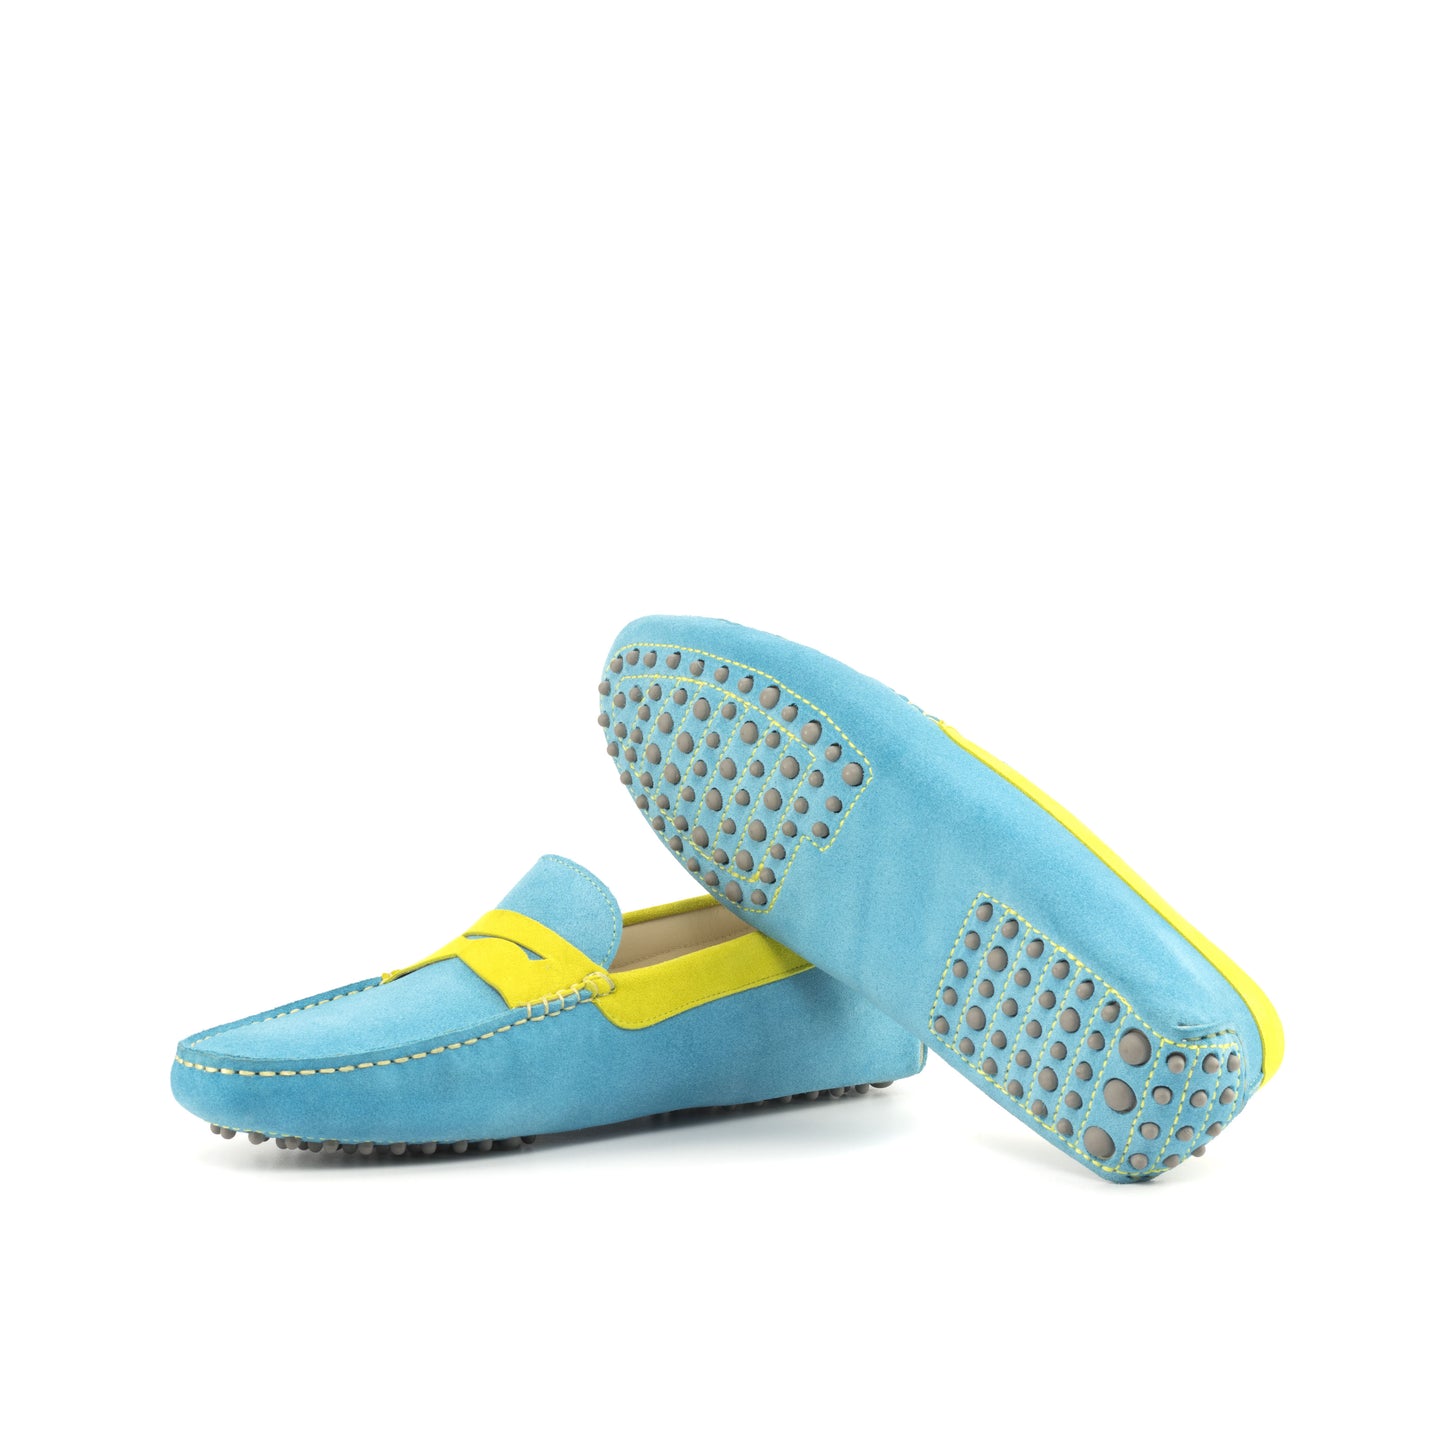 SUITCAFE Driver Turquoise Suede and Yellow Men's Loafer Shoes